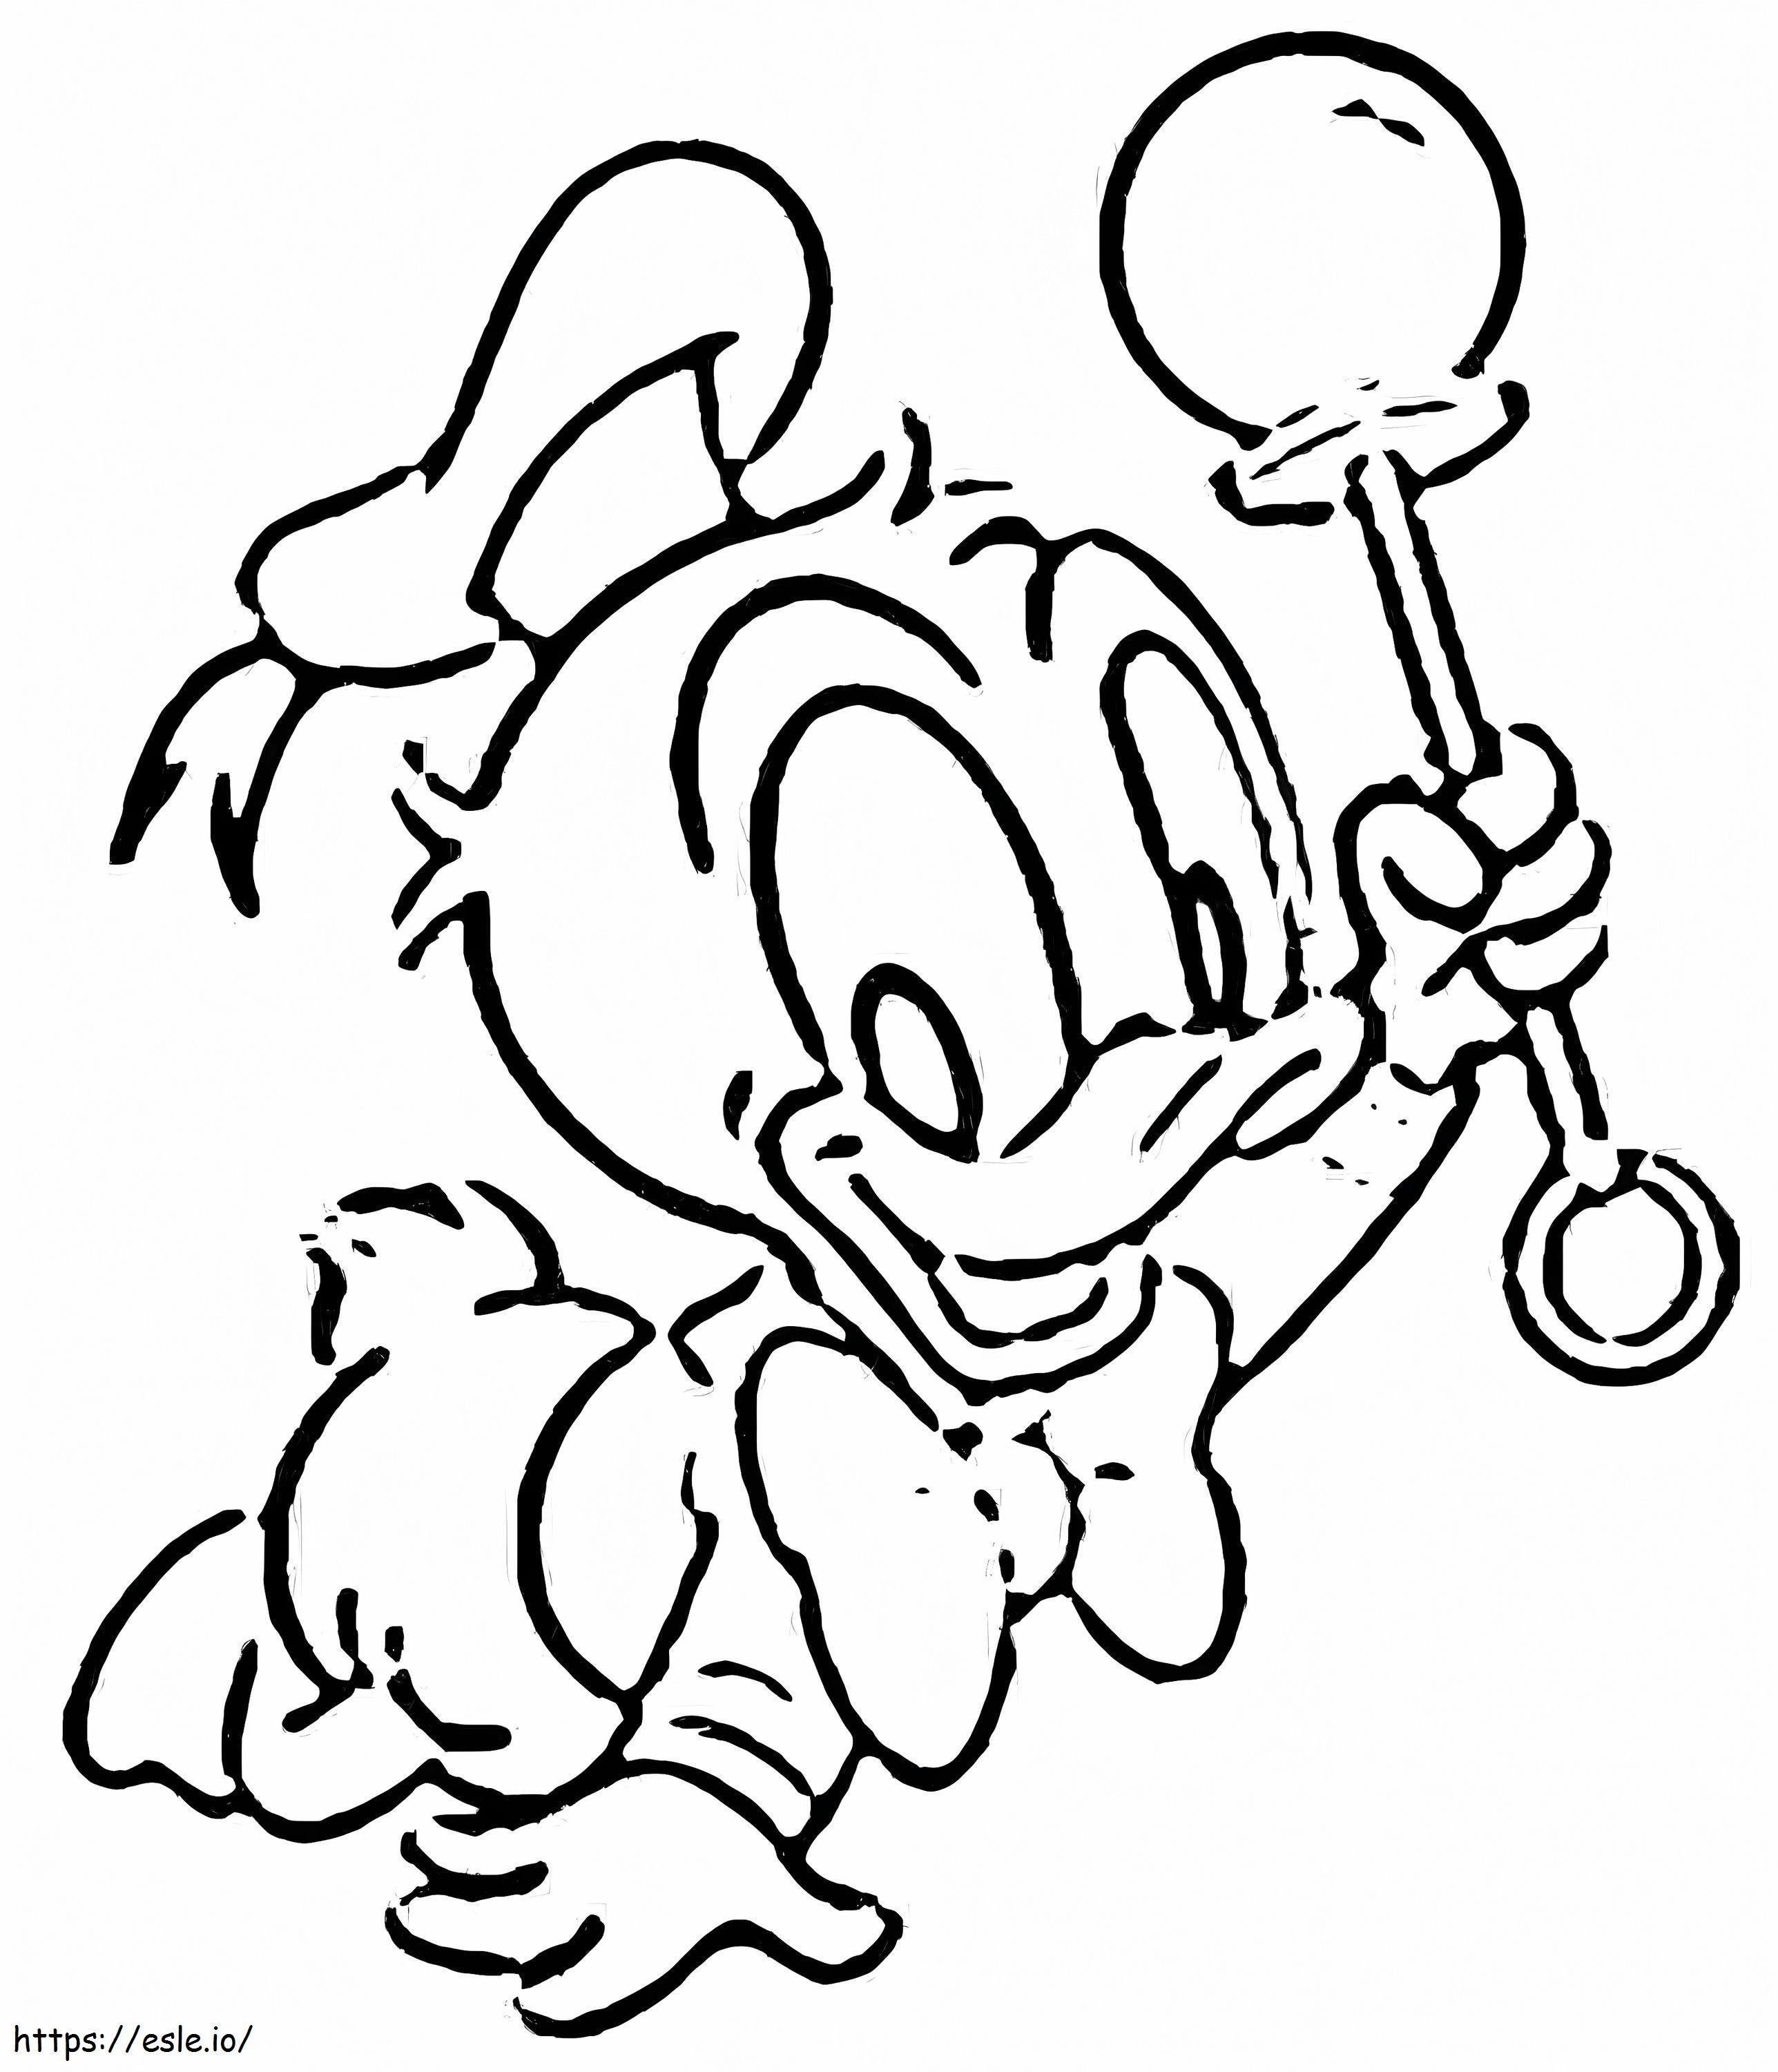 Disney Baby Donald Duck coloring page